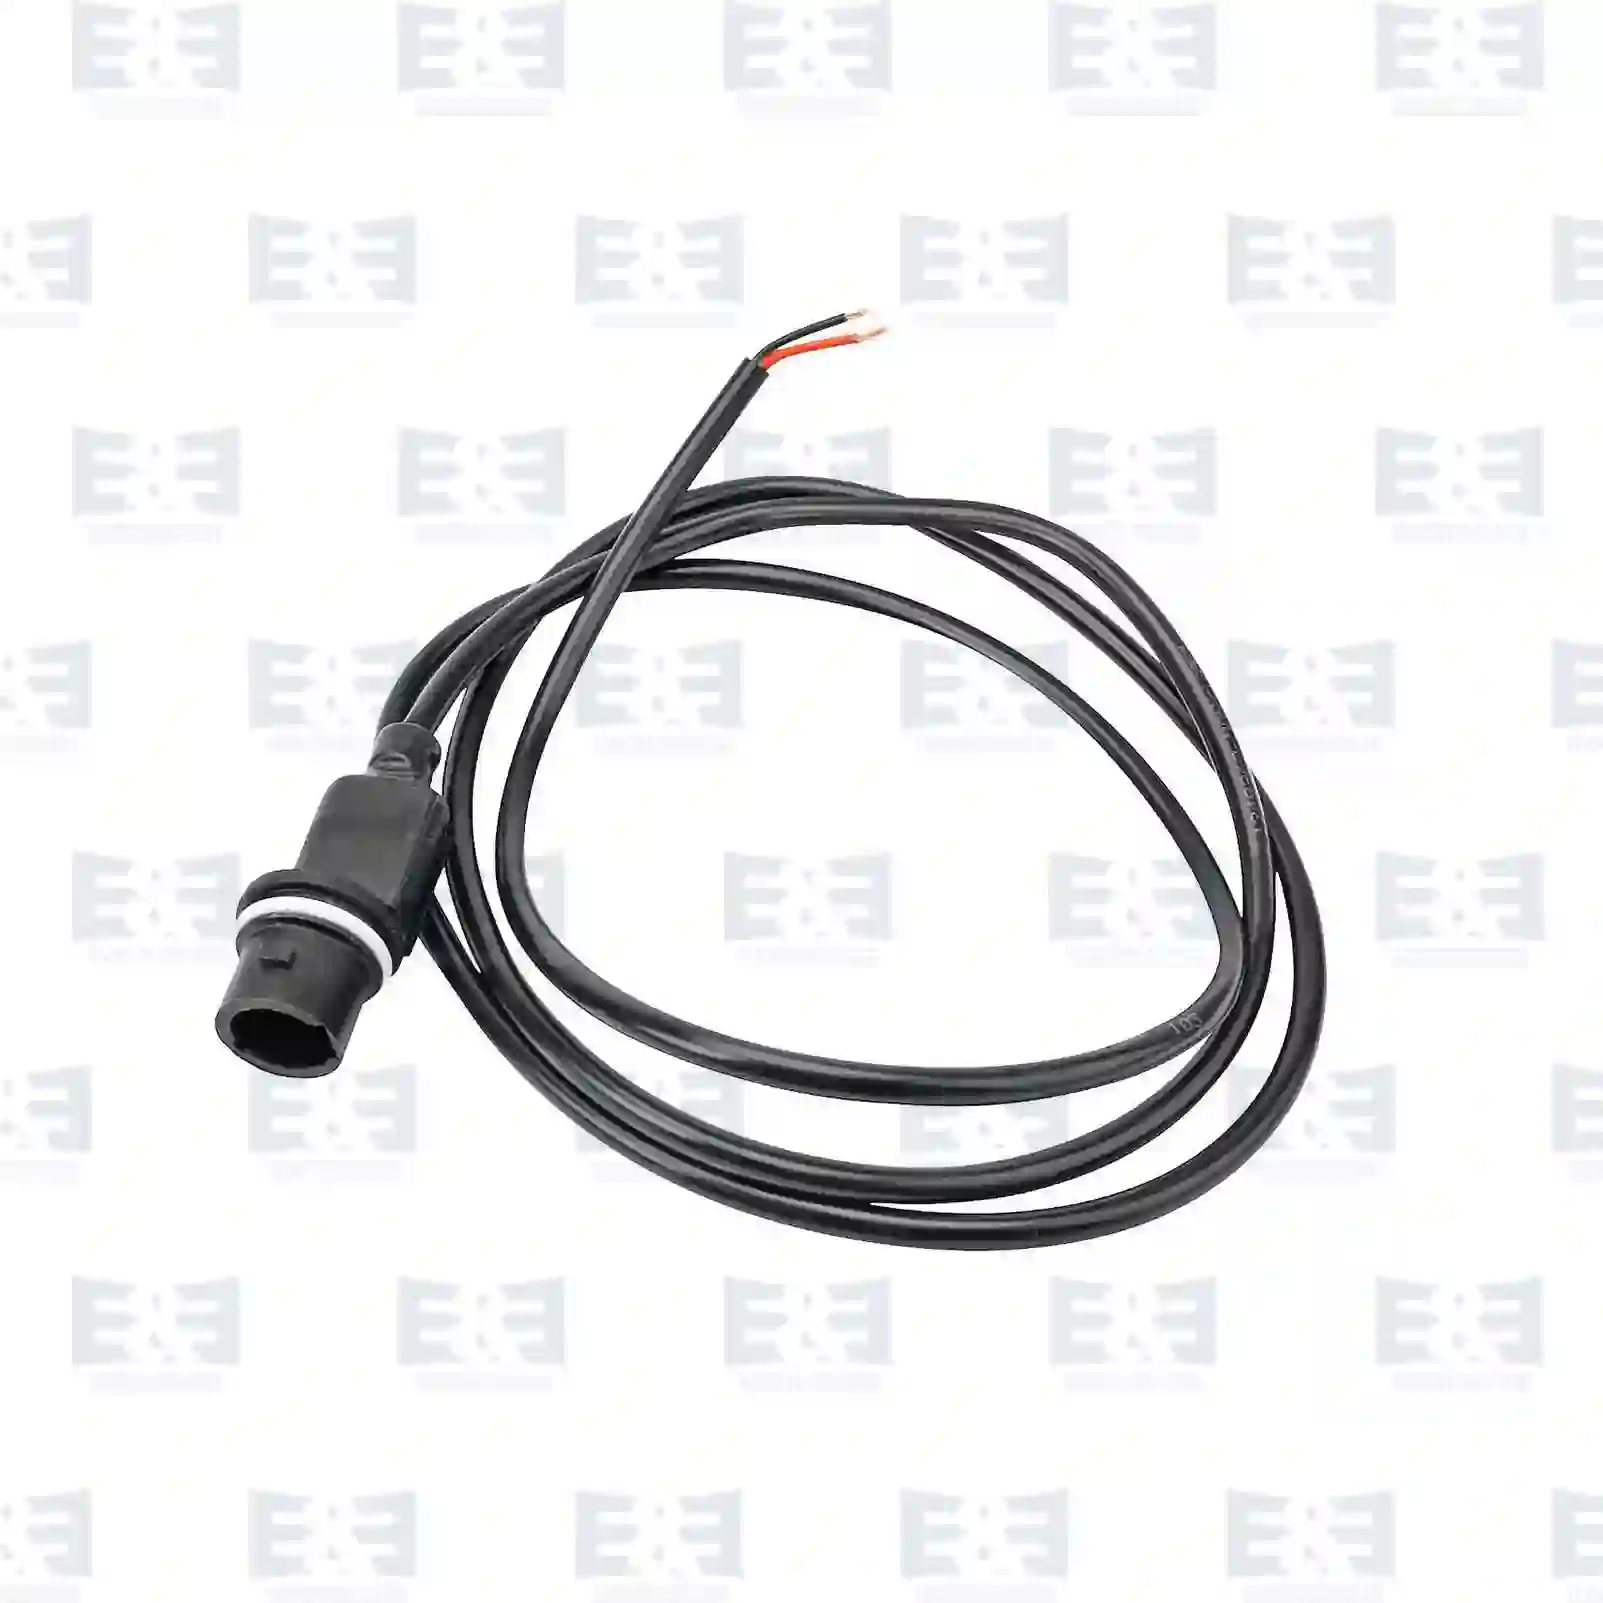  Lamp socket, with cable || E&E Truck Spare Parts | Truck Spare Parts, Auotomotive Spare Parts